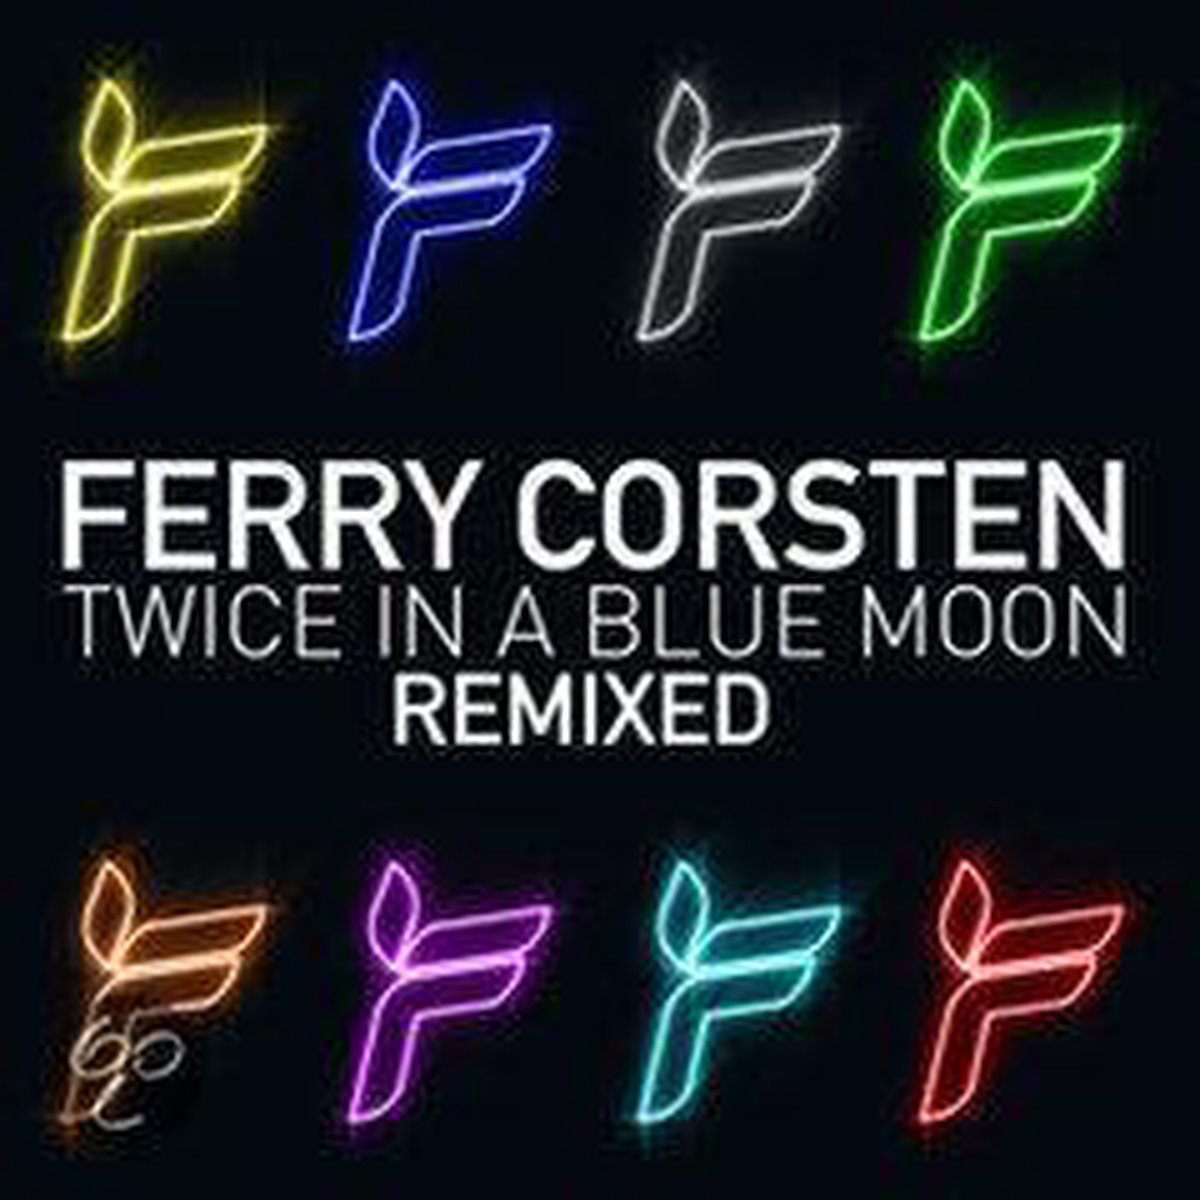 Twice In A Blue Moon Remixed - Ferry Corsten